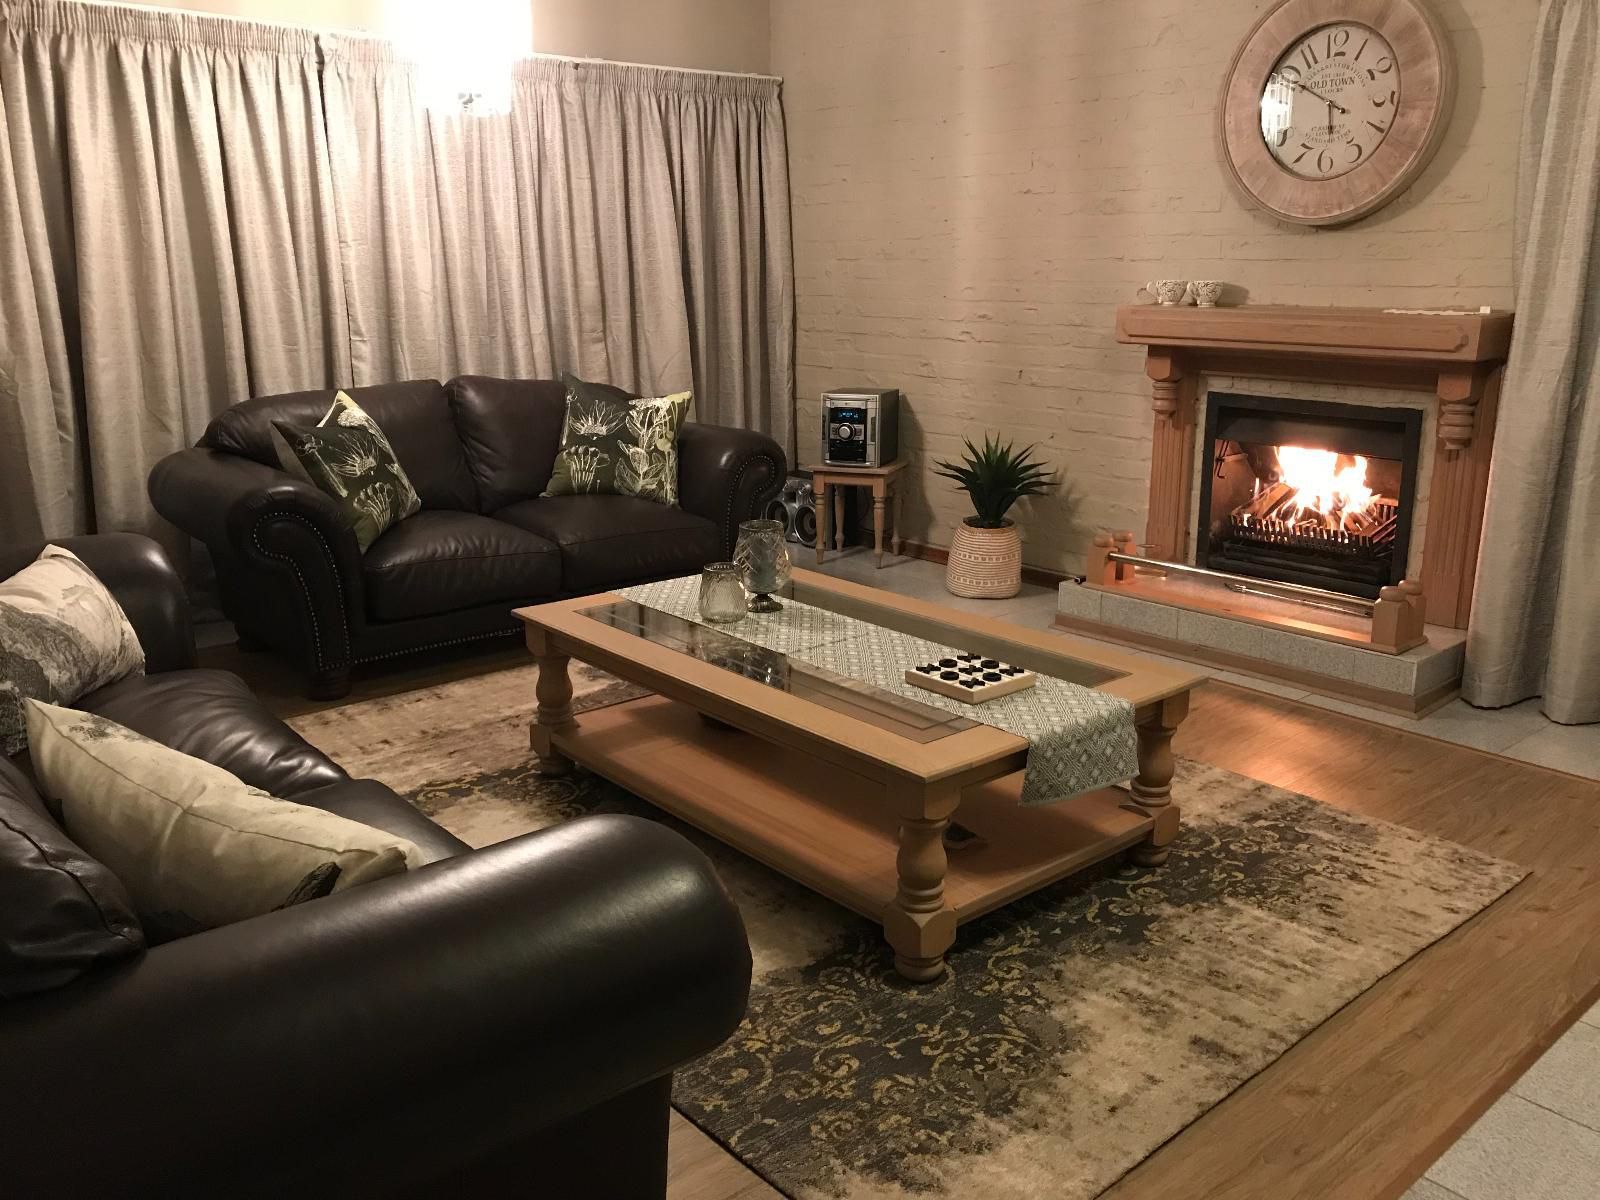 Anne S Place Potchefstroom North West Province South Africa Sepia Tones, Fire, Nature, Living Room